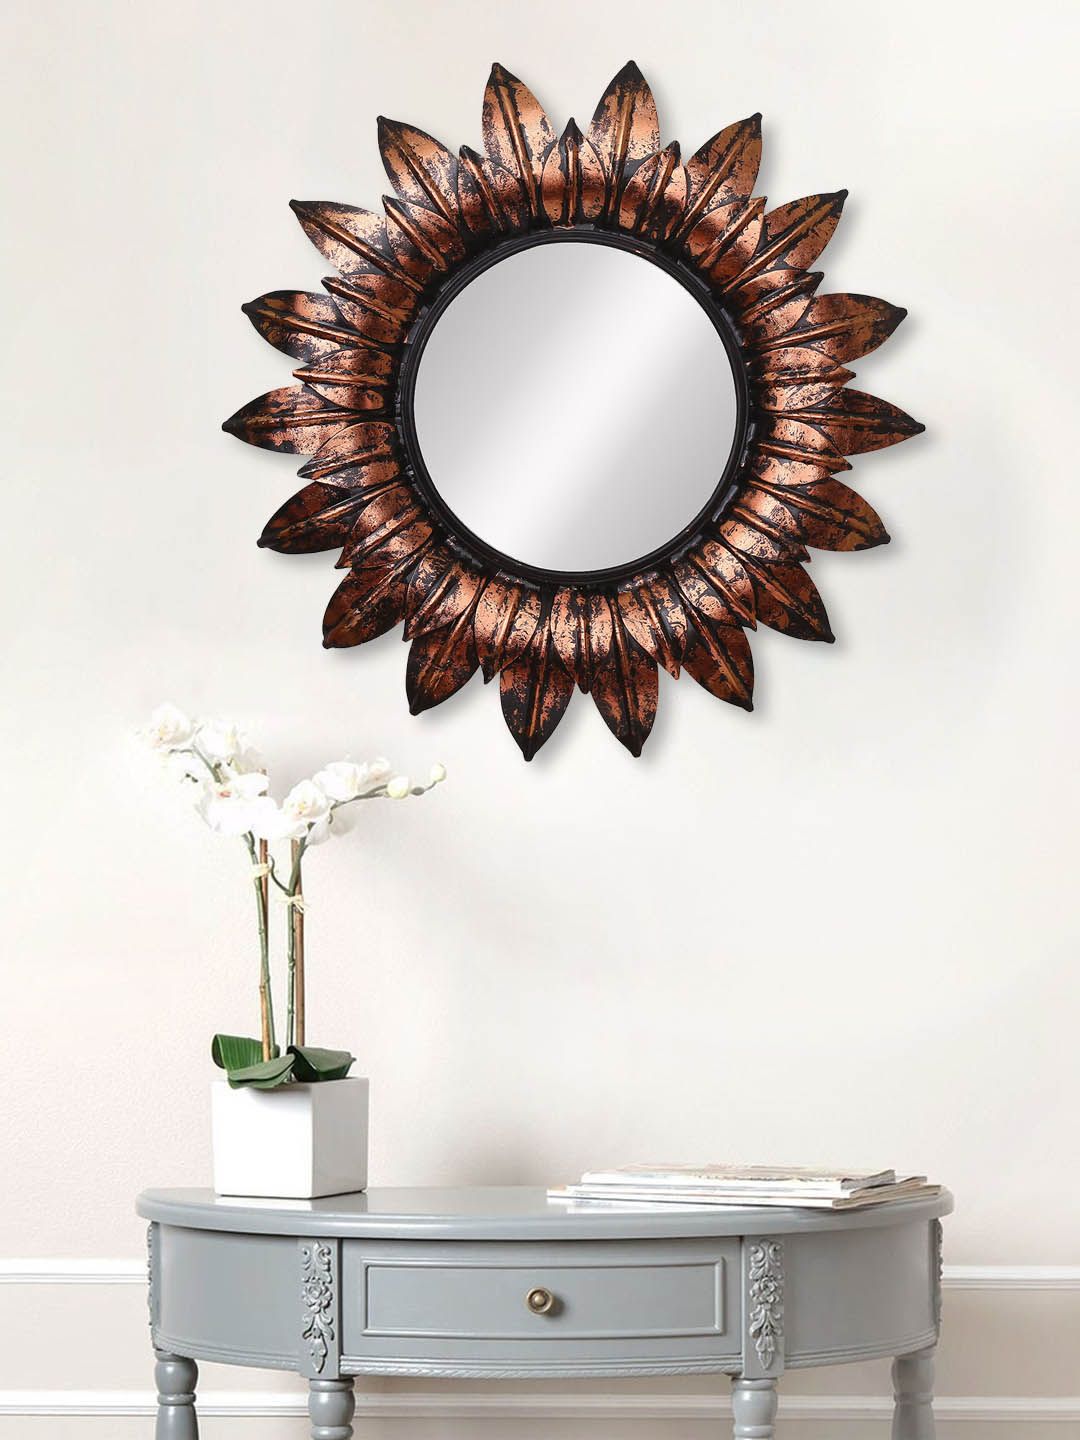 eCraftIndia Copper-Toned & Black Metal Decorative Handcarved Wall Mirror Price in India